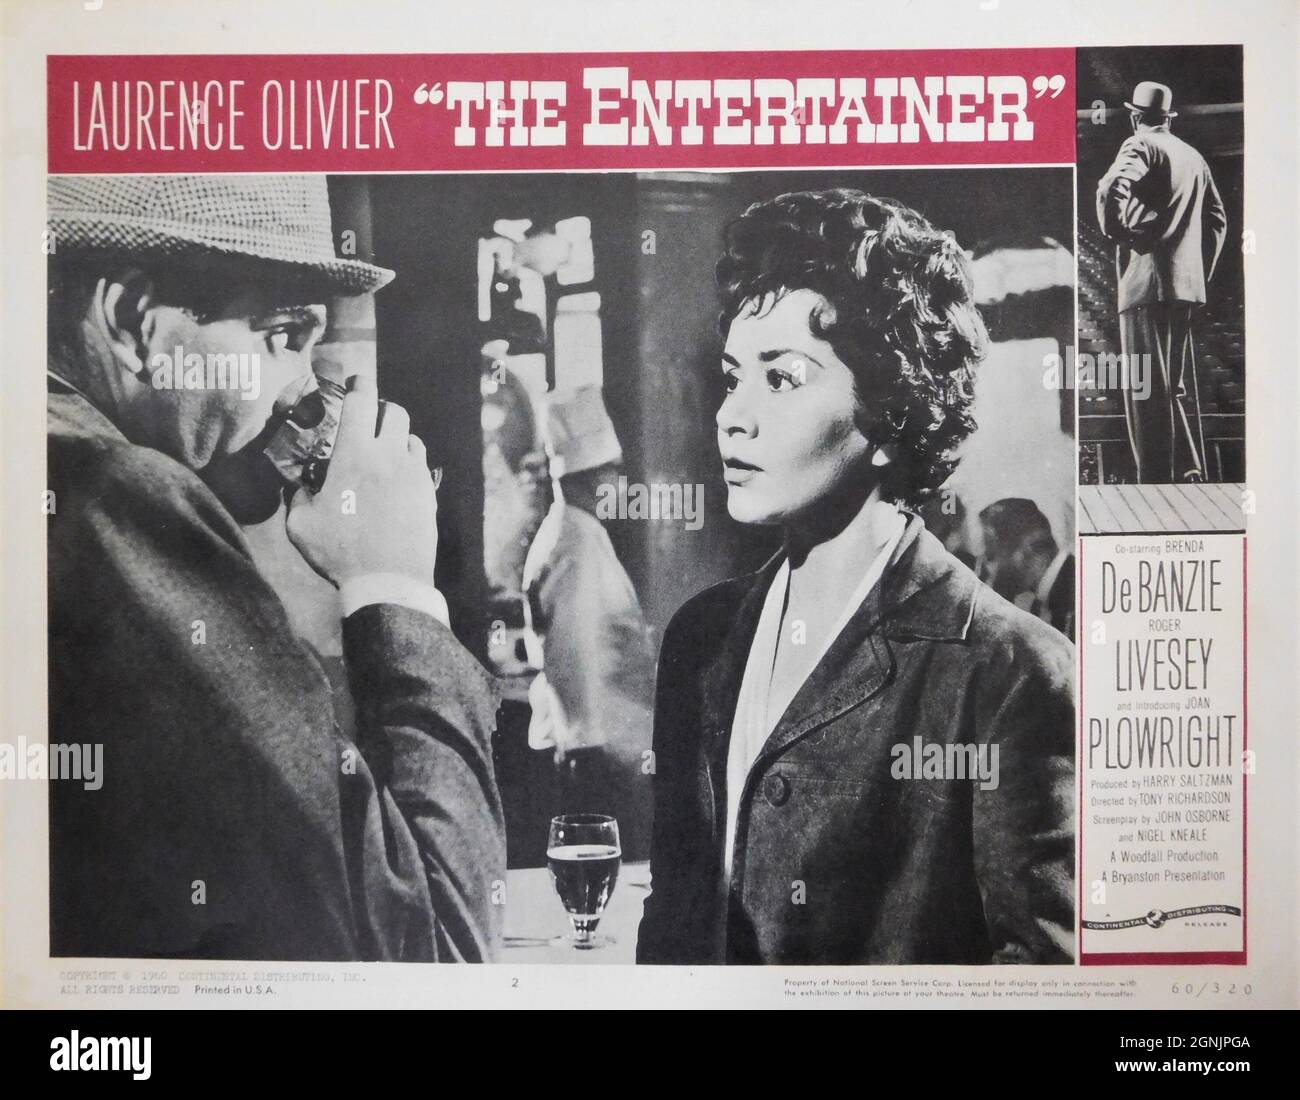 LAURENCE OLIVIER as Archie Rice and JOAN PLOWRIGHT as Jean in THE ENTERTAINER 1960 director TONY RICHARDSON screenplay John Osborne and Nigel Kneale adapted from the play by John Osborne music John Addison producer Harry Saltzman Woodfall Film Productions / British Lion Films (UK) - Continental Distributing (US) Stock Photo